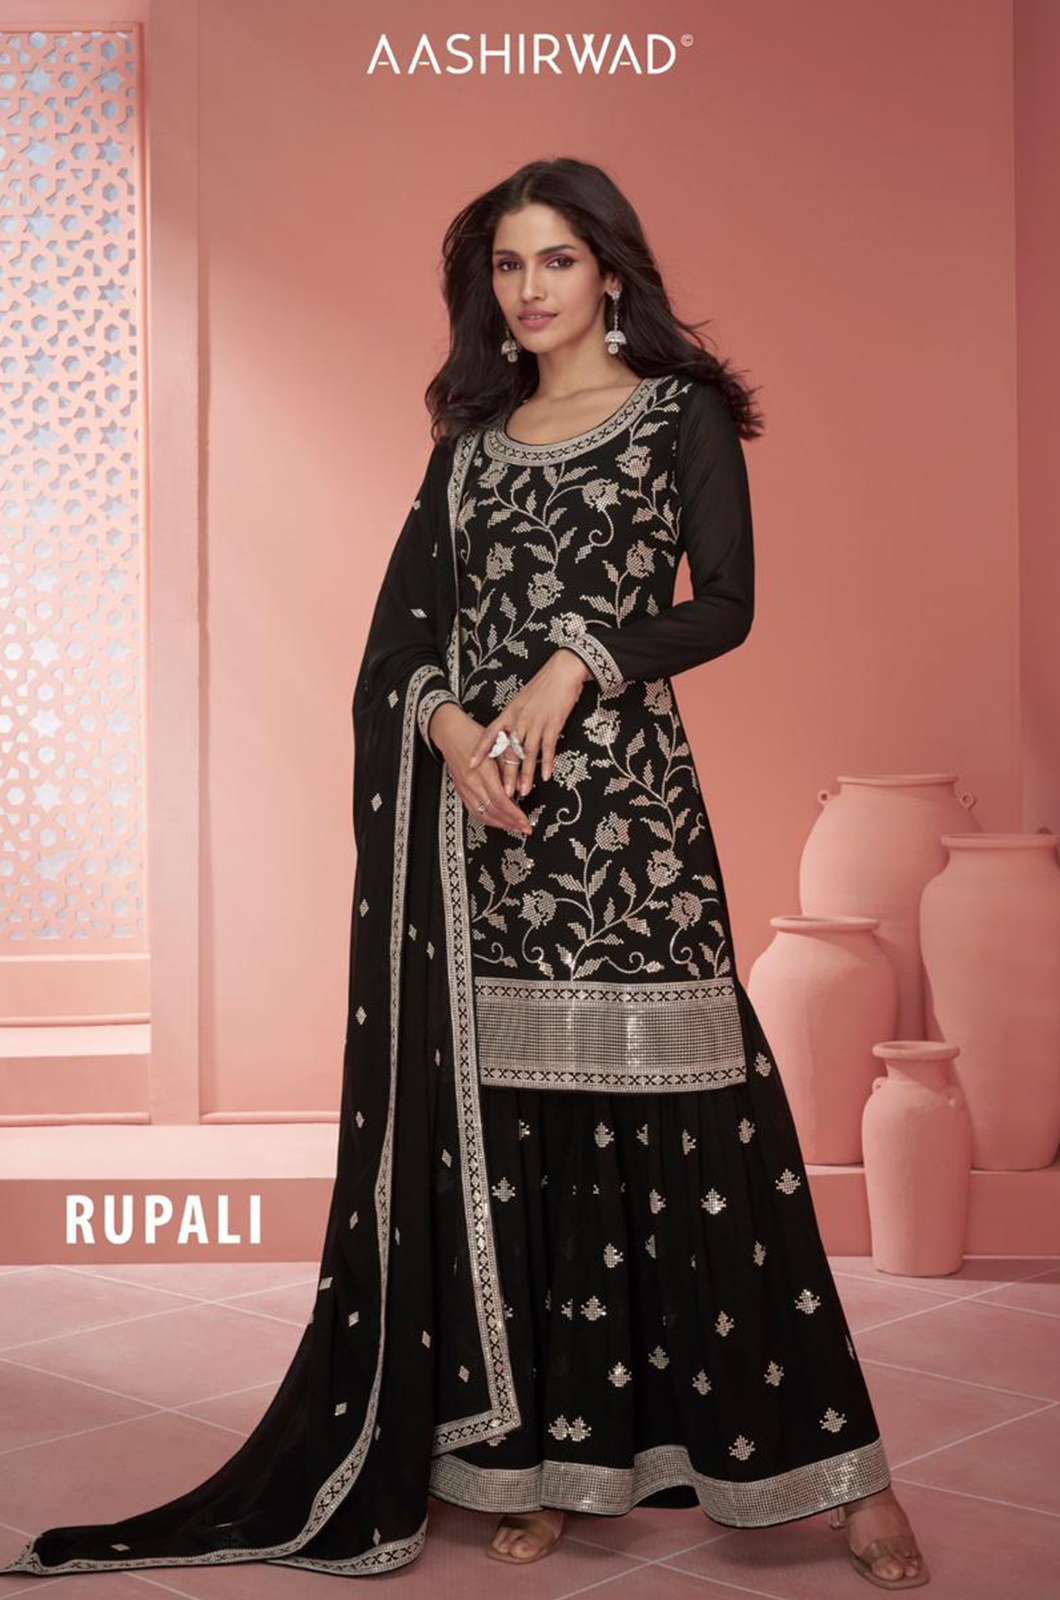 AASHIRWAD RUPALI REAL GEORGETTE BLACK & WHITE SUIT WITH EMBROIDER WORK